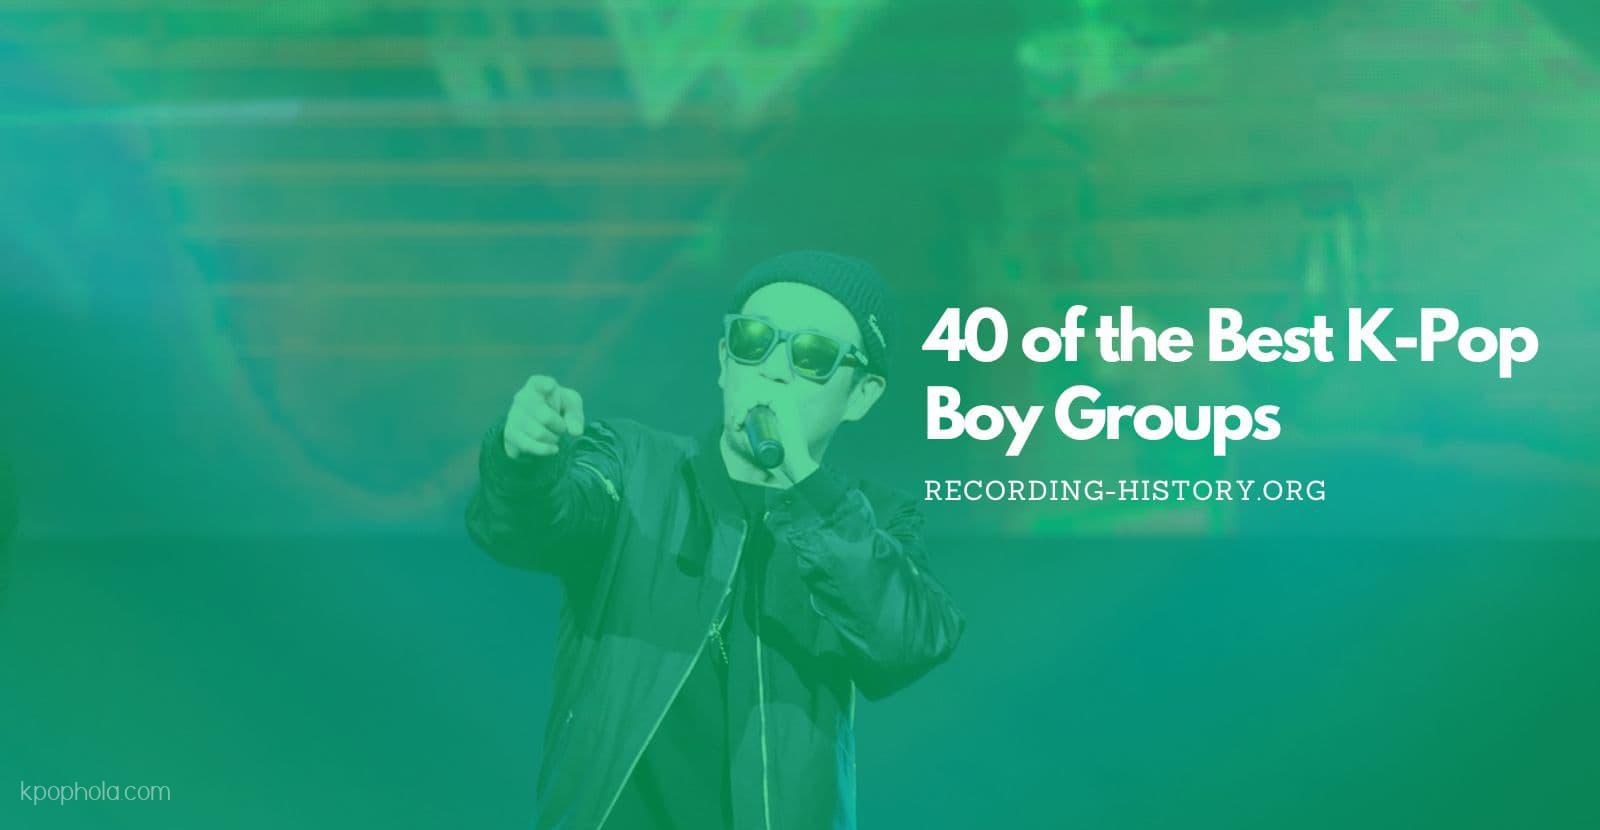 50 of the Best K-Pop Boy Groups | The Ultimate List